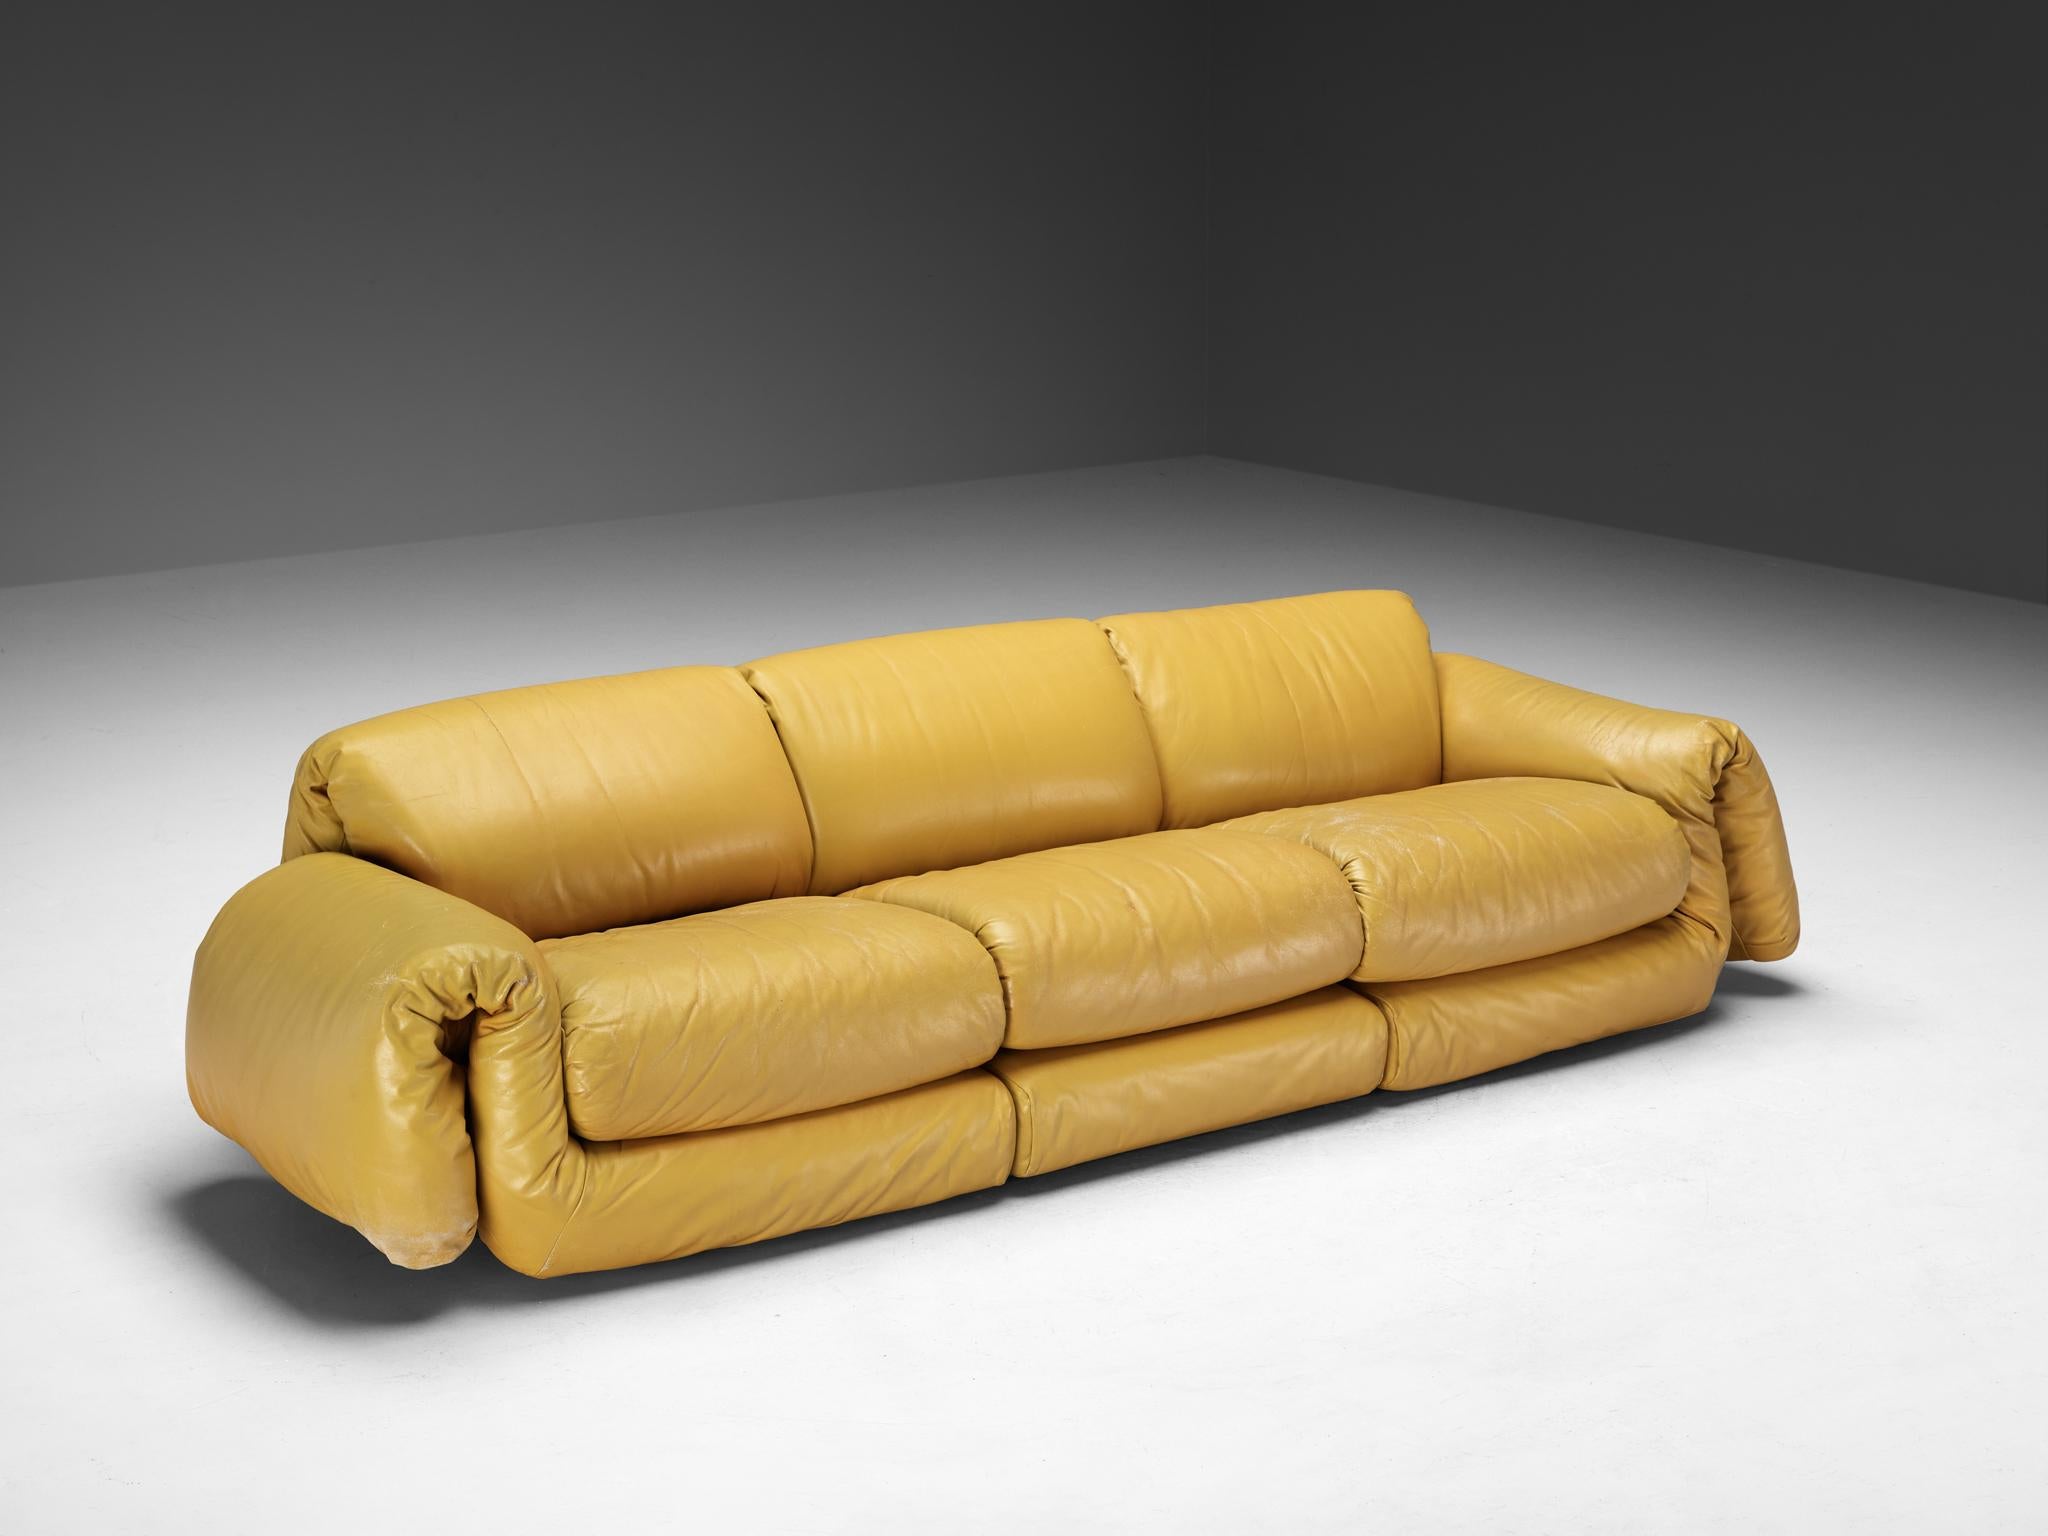 Three seat sofa, leather, Europe, 1970s

Eye catching sofa made in the vibrant 1970s in Europe. This piece serves as a embodiment of both stylish design and comfort, with its plush and very soft leather cushions. This piece boasts a vibrant yellow